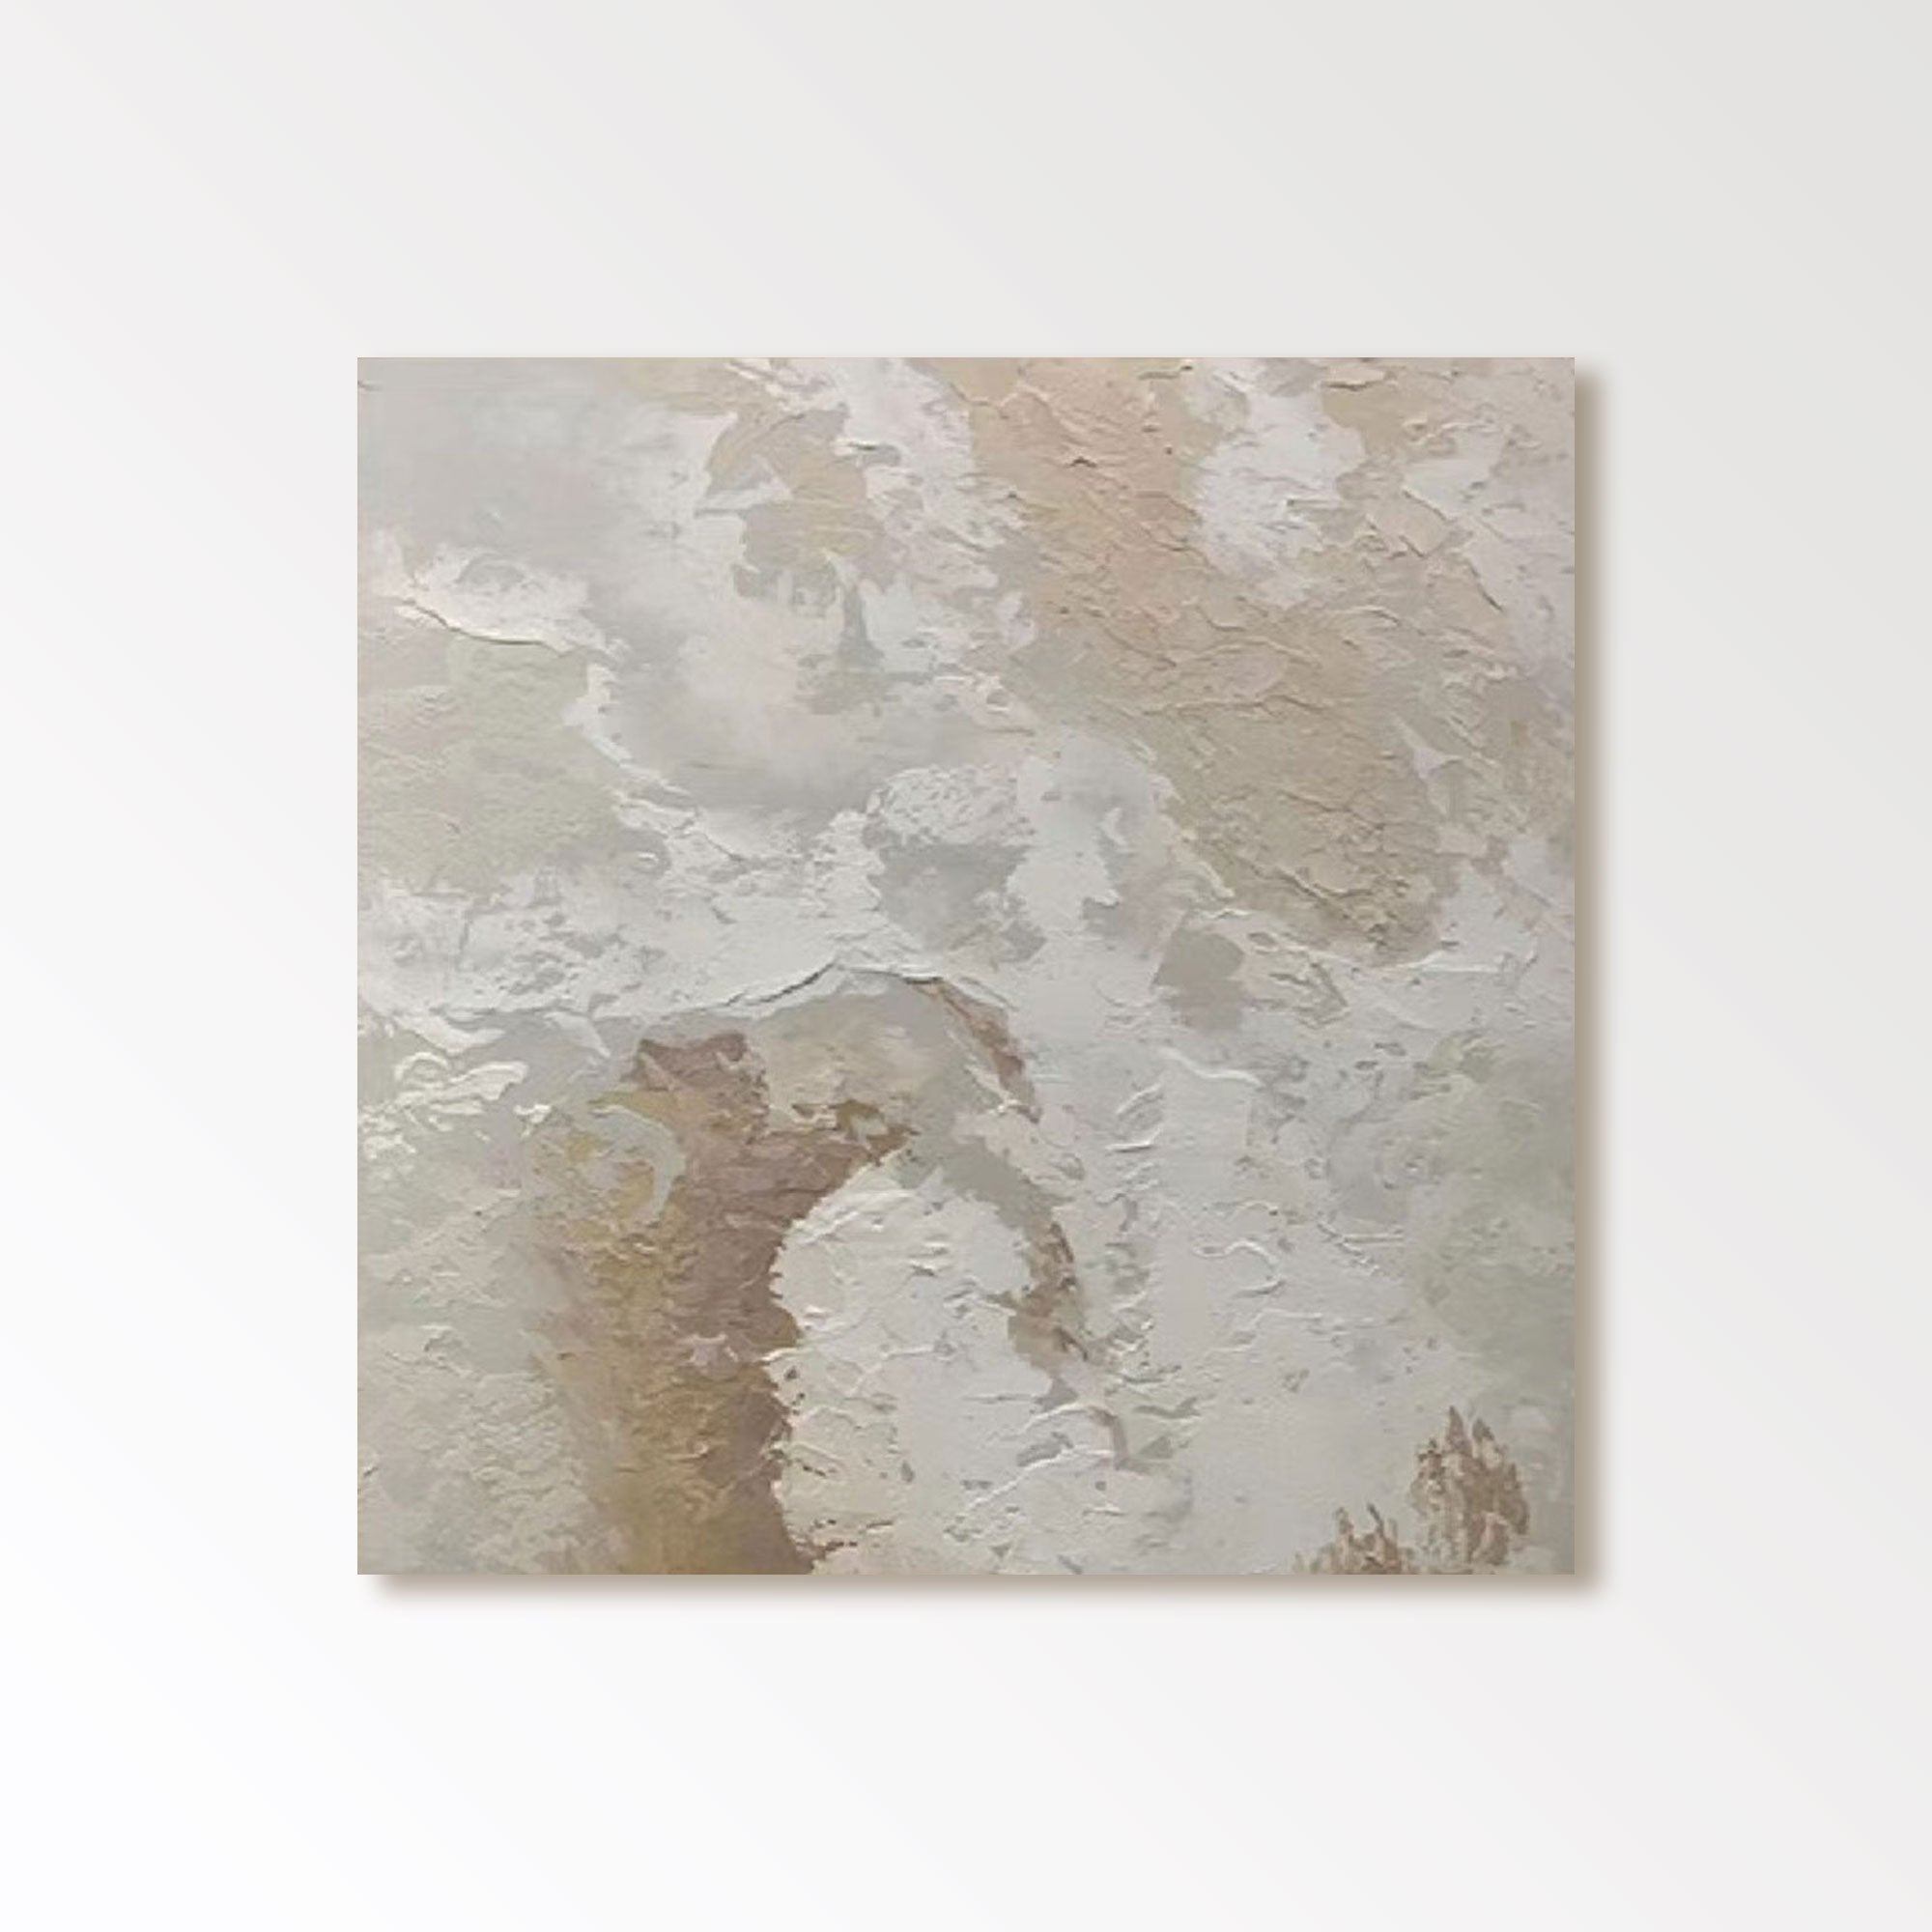 Abstract Plaster Textured Painting "Nebular"